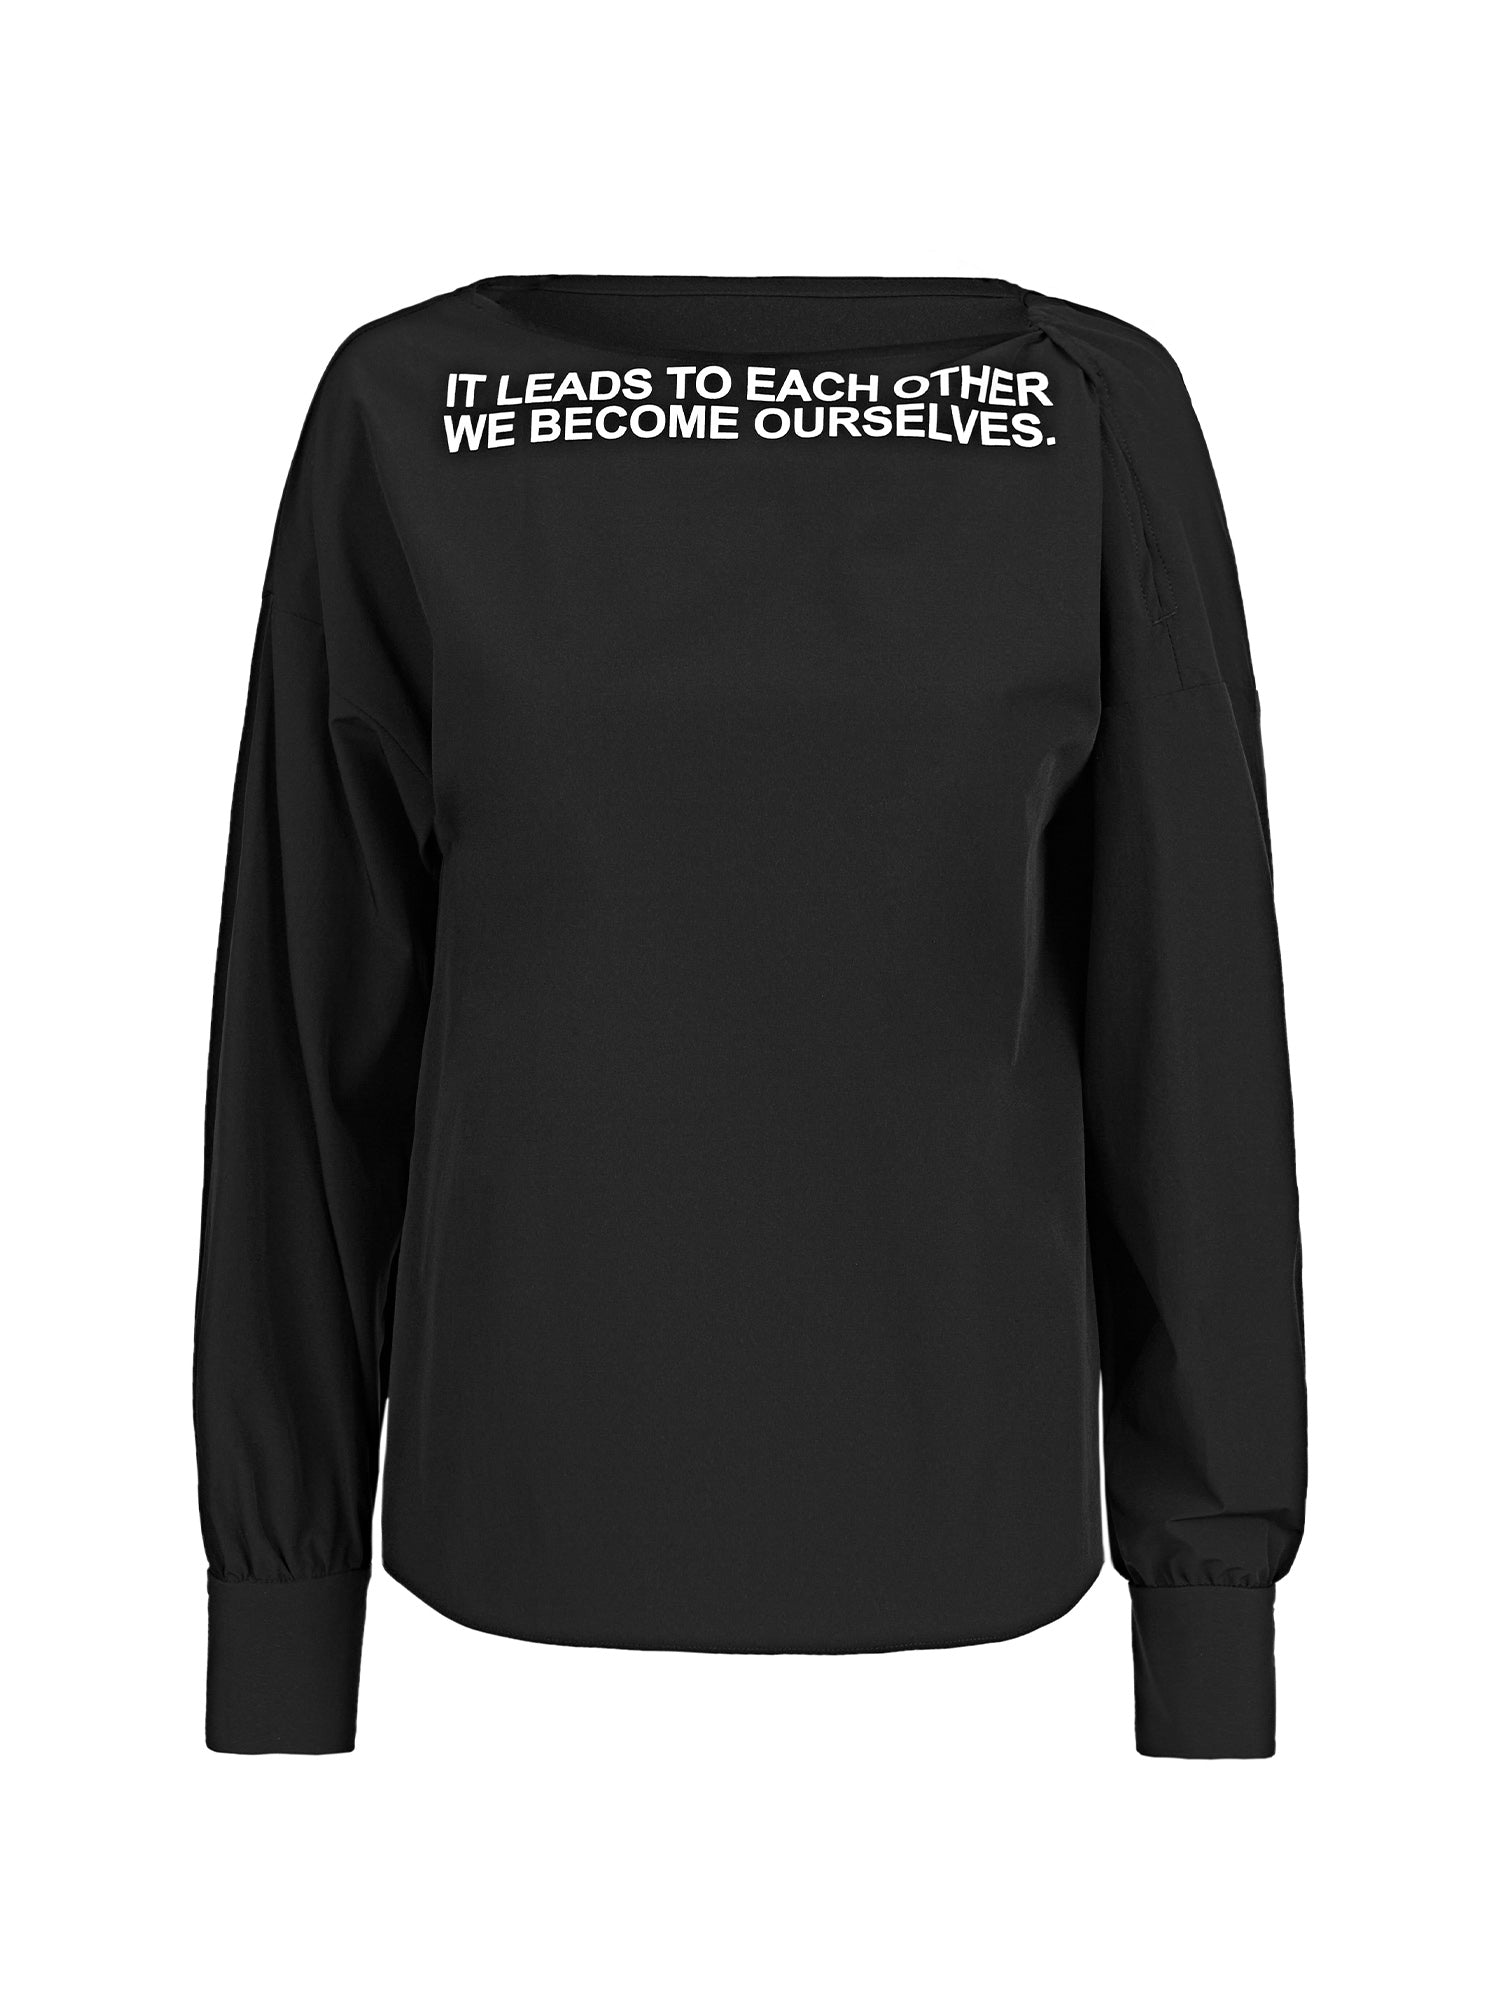 Black long-sleeved shirt with boat neck block letters - S·DEER